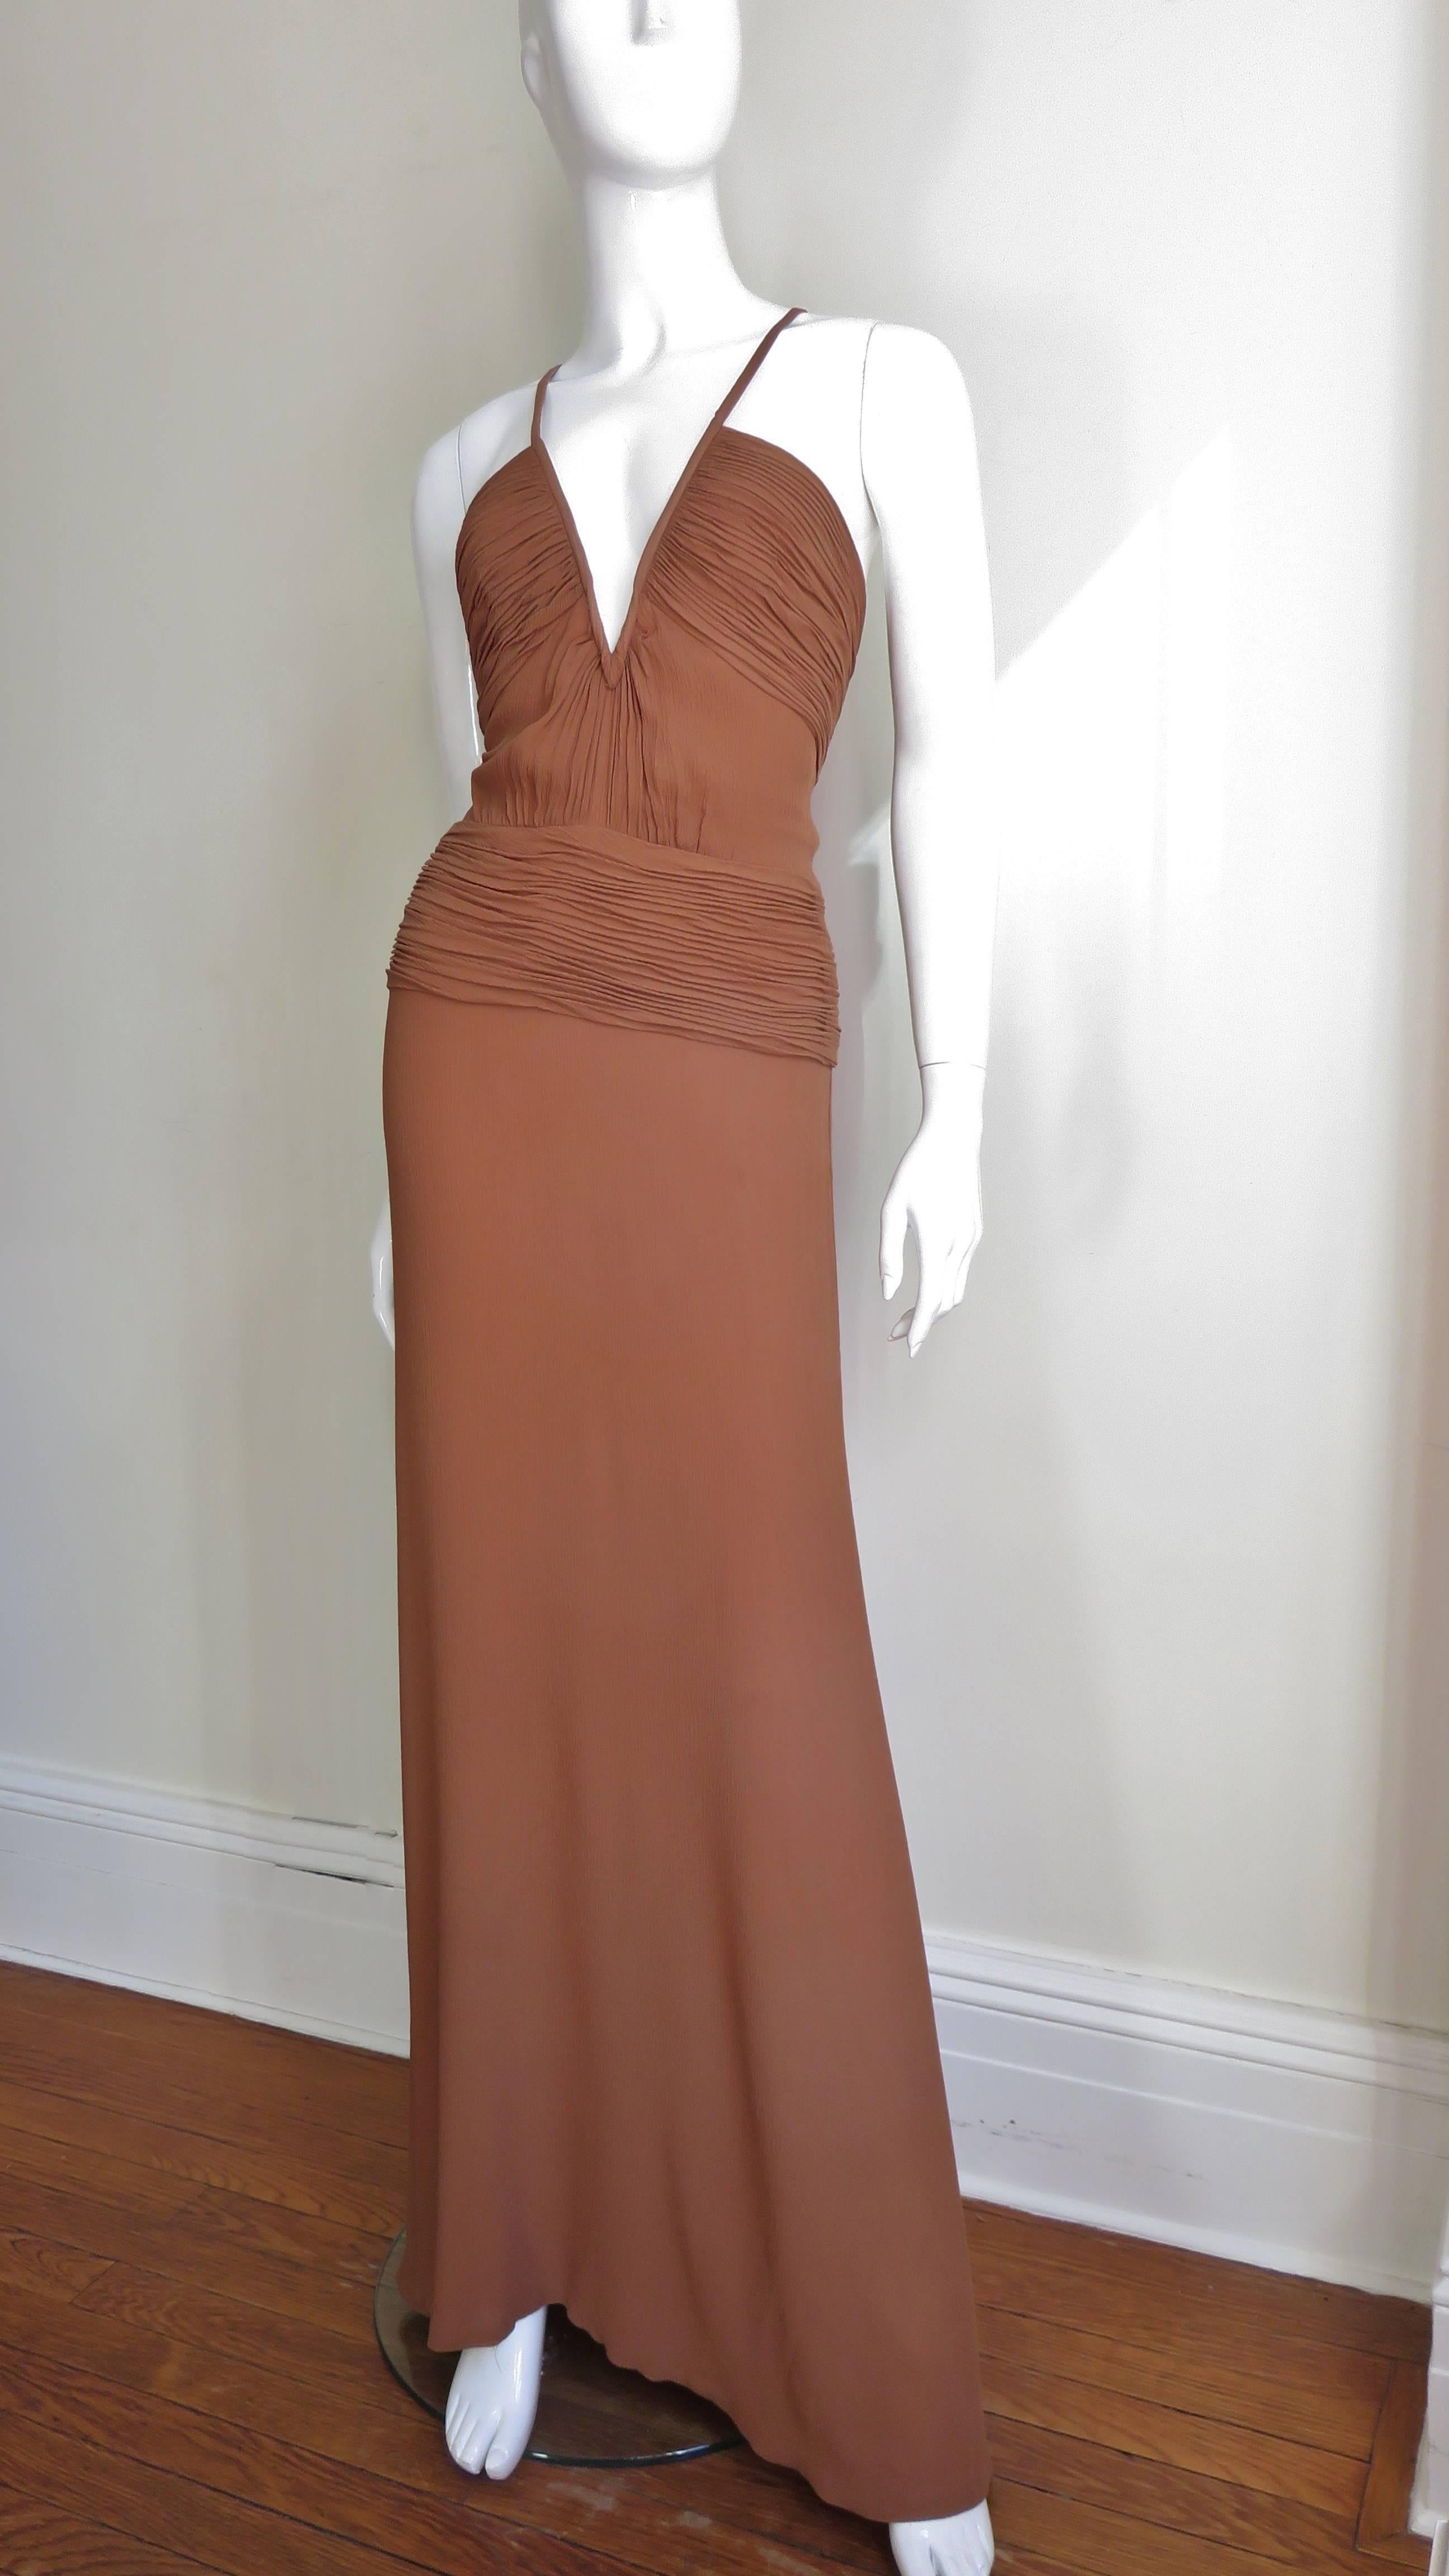 A gorgeous tan brown silk gown from Gianni Versace Couture. It has a V neckline with spaghetti straps, ruched panels across the bust and another around the waist and hips. The skirt portion is slightly fuller below the knee in the front and fuller